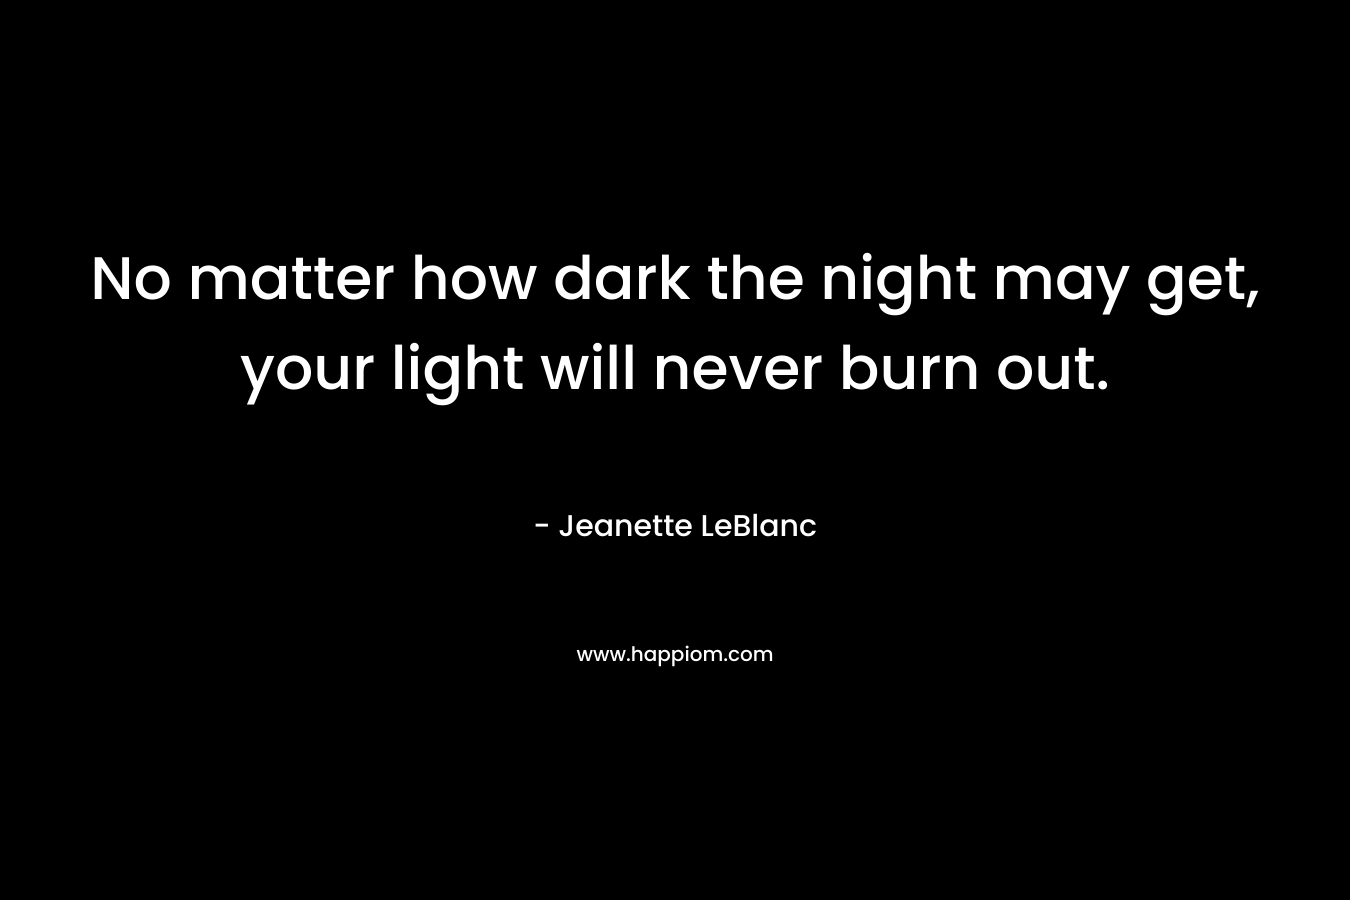 No matter how dark the night may get, your light will never burn out.